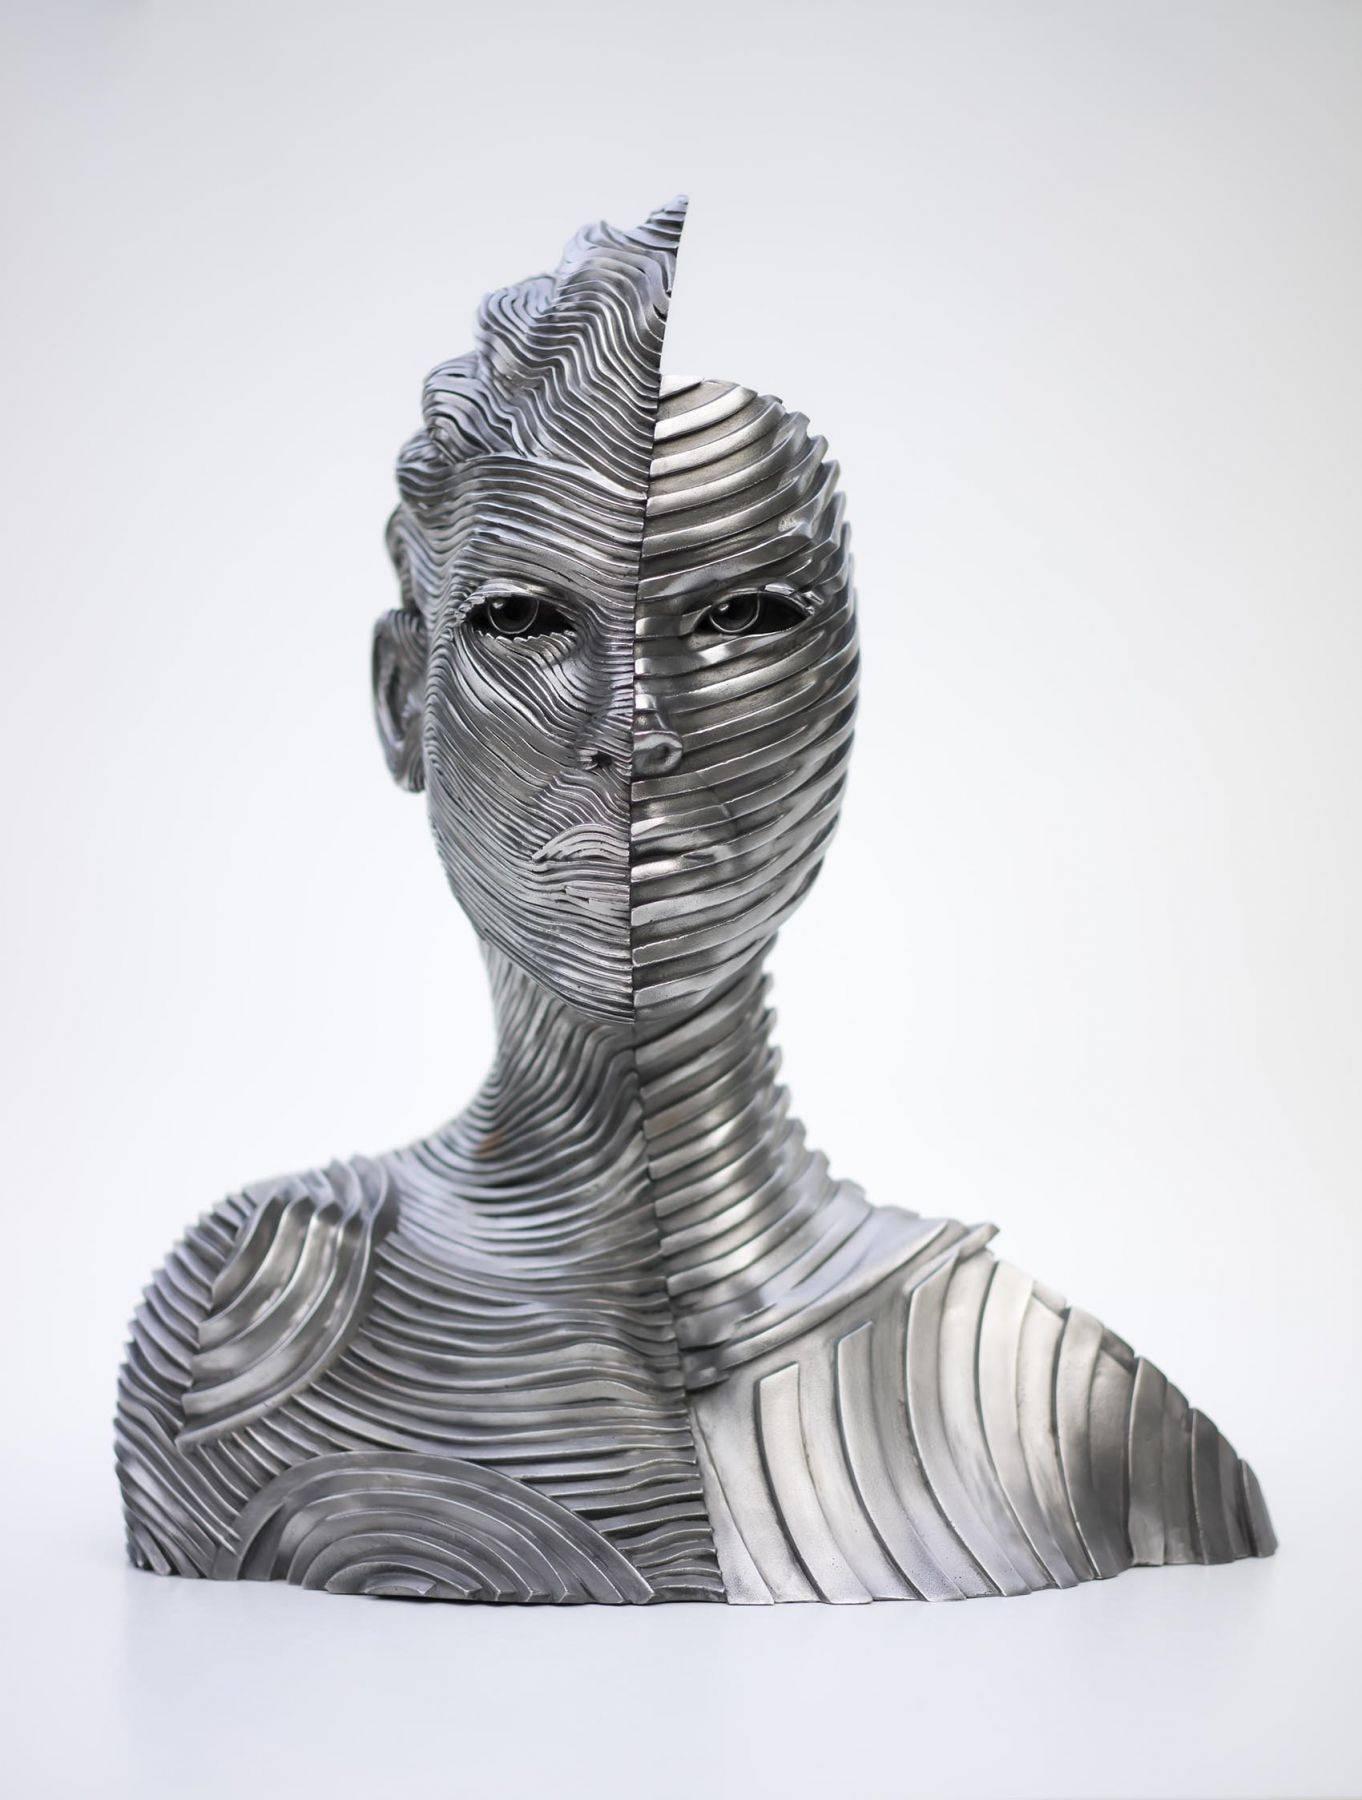 My Mirror Remains - Sculpture by Gil Bruvel